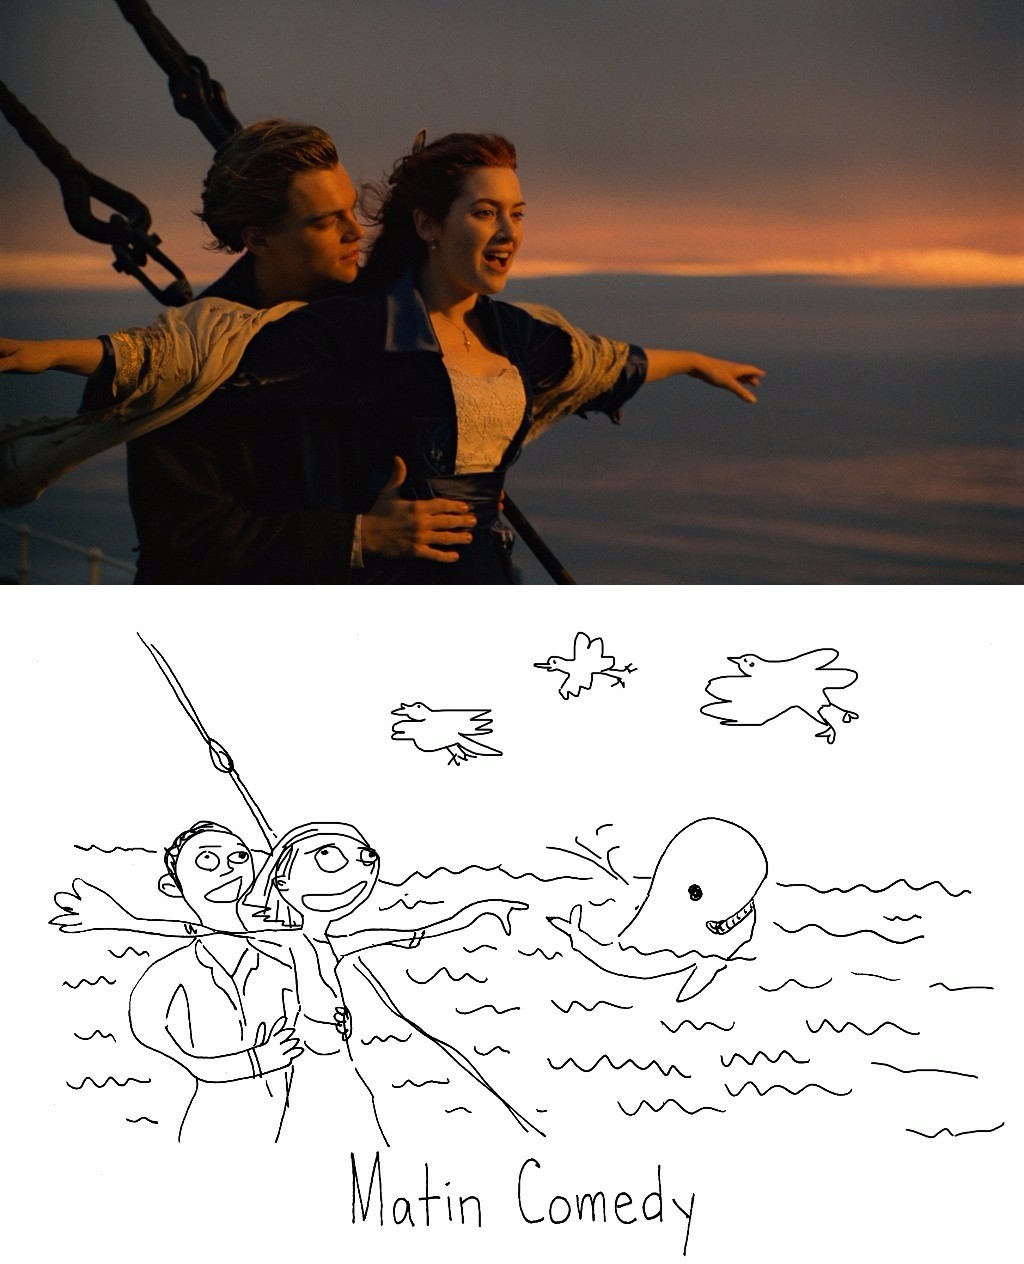 I recreated a famous Titanic scene using my incredible drawing.